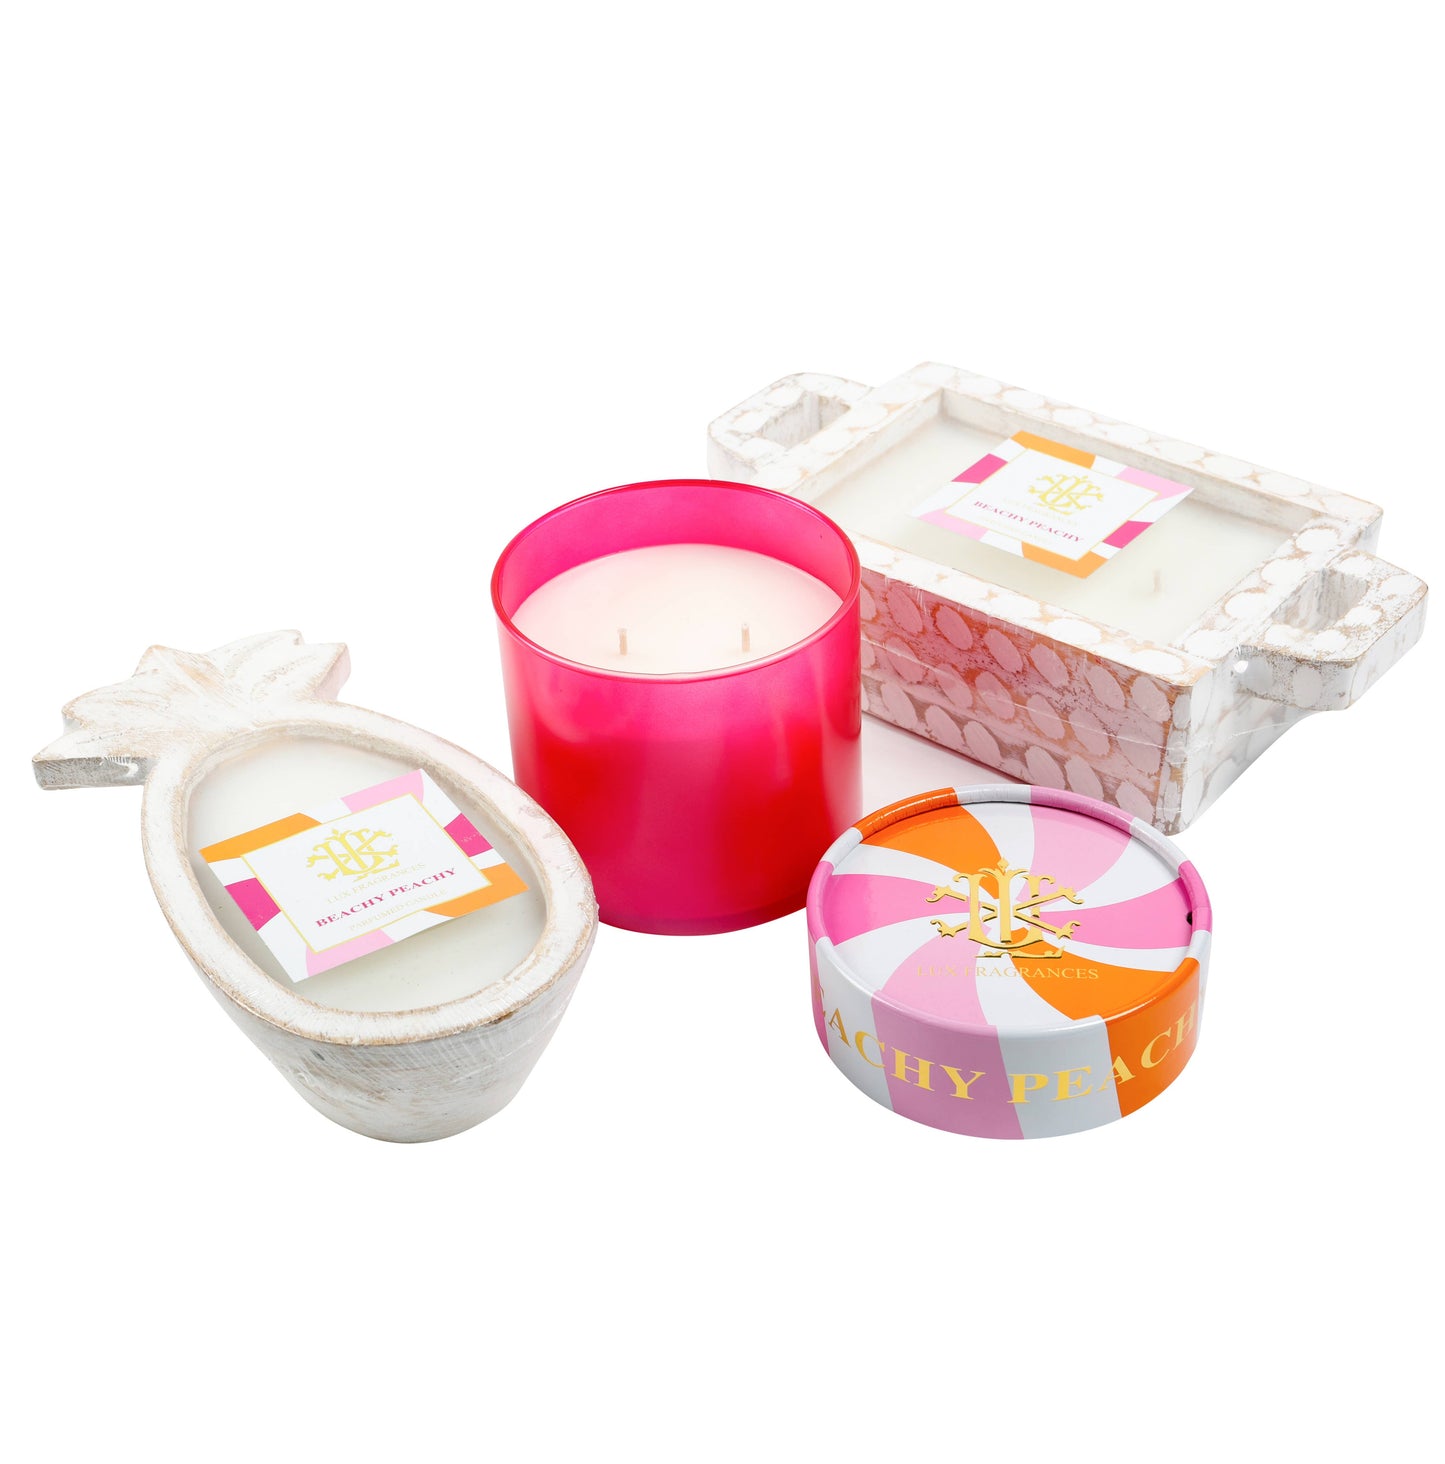 Beachy Peachy Sangria With Decorative Lid 15 oz Candle